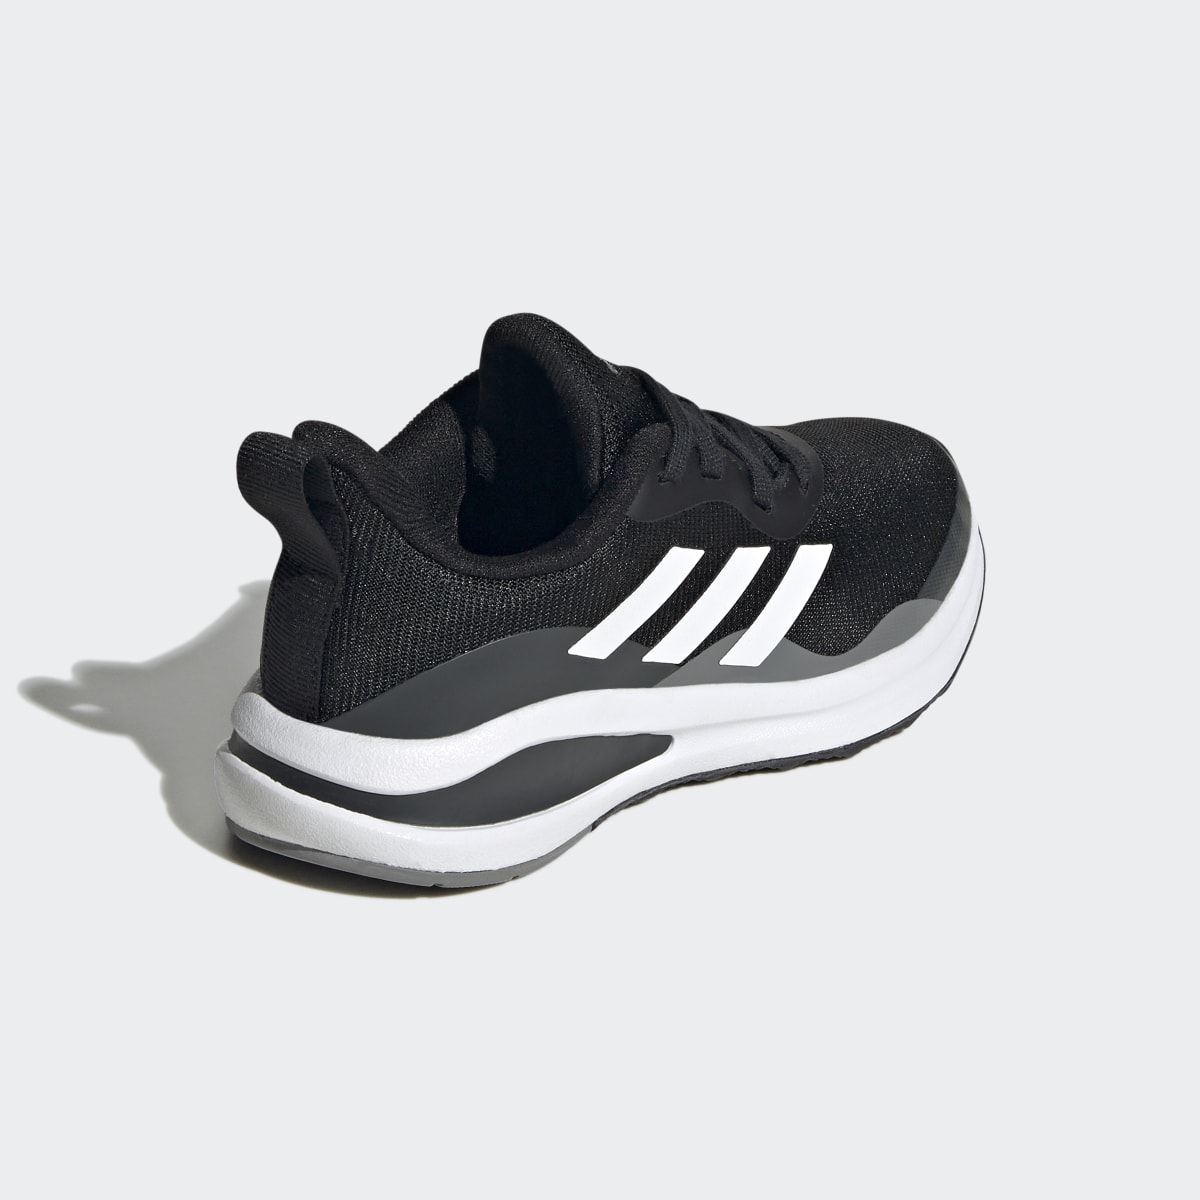 Adidas FortaRun Sport Running Lace Shoes. 6